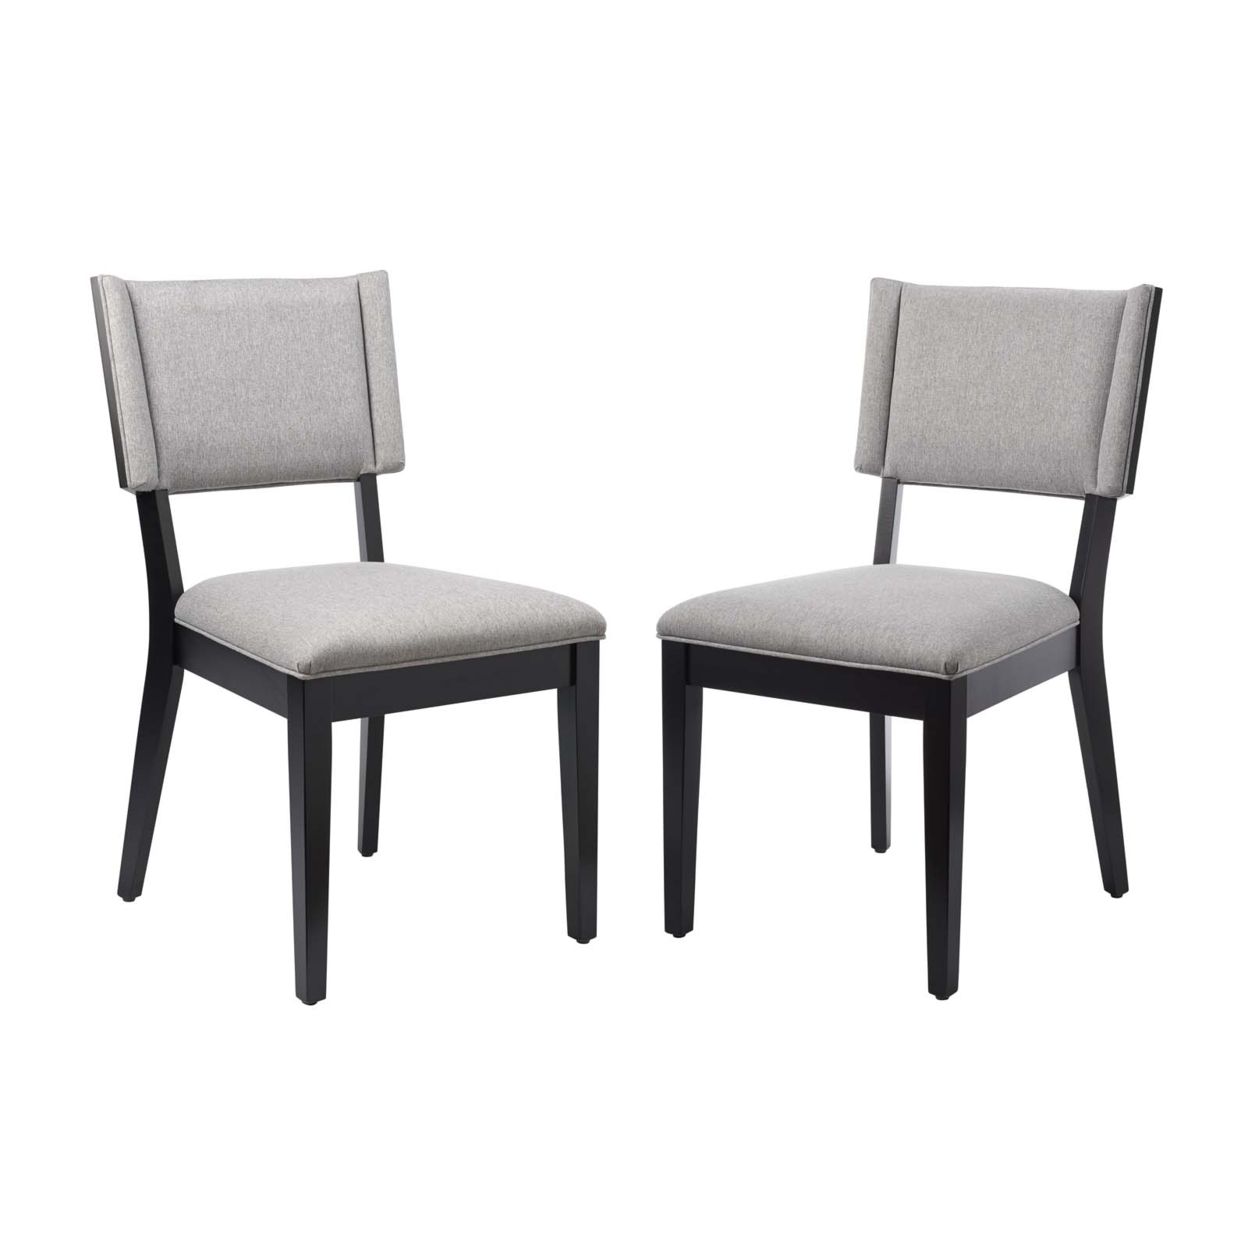 Esquire Dining Chairs - Set Of 2, Light Gray